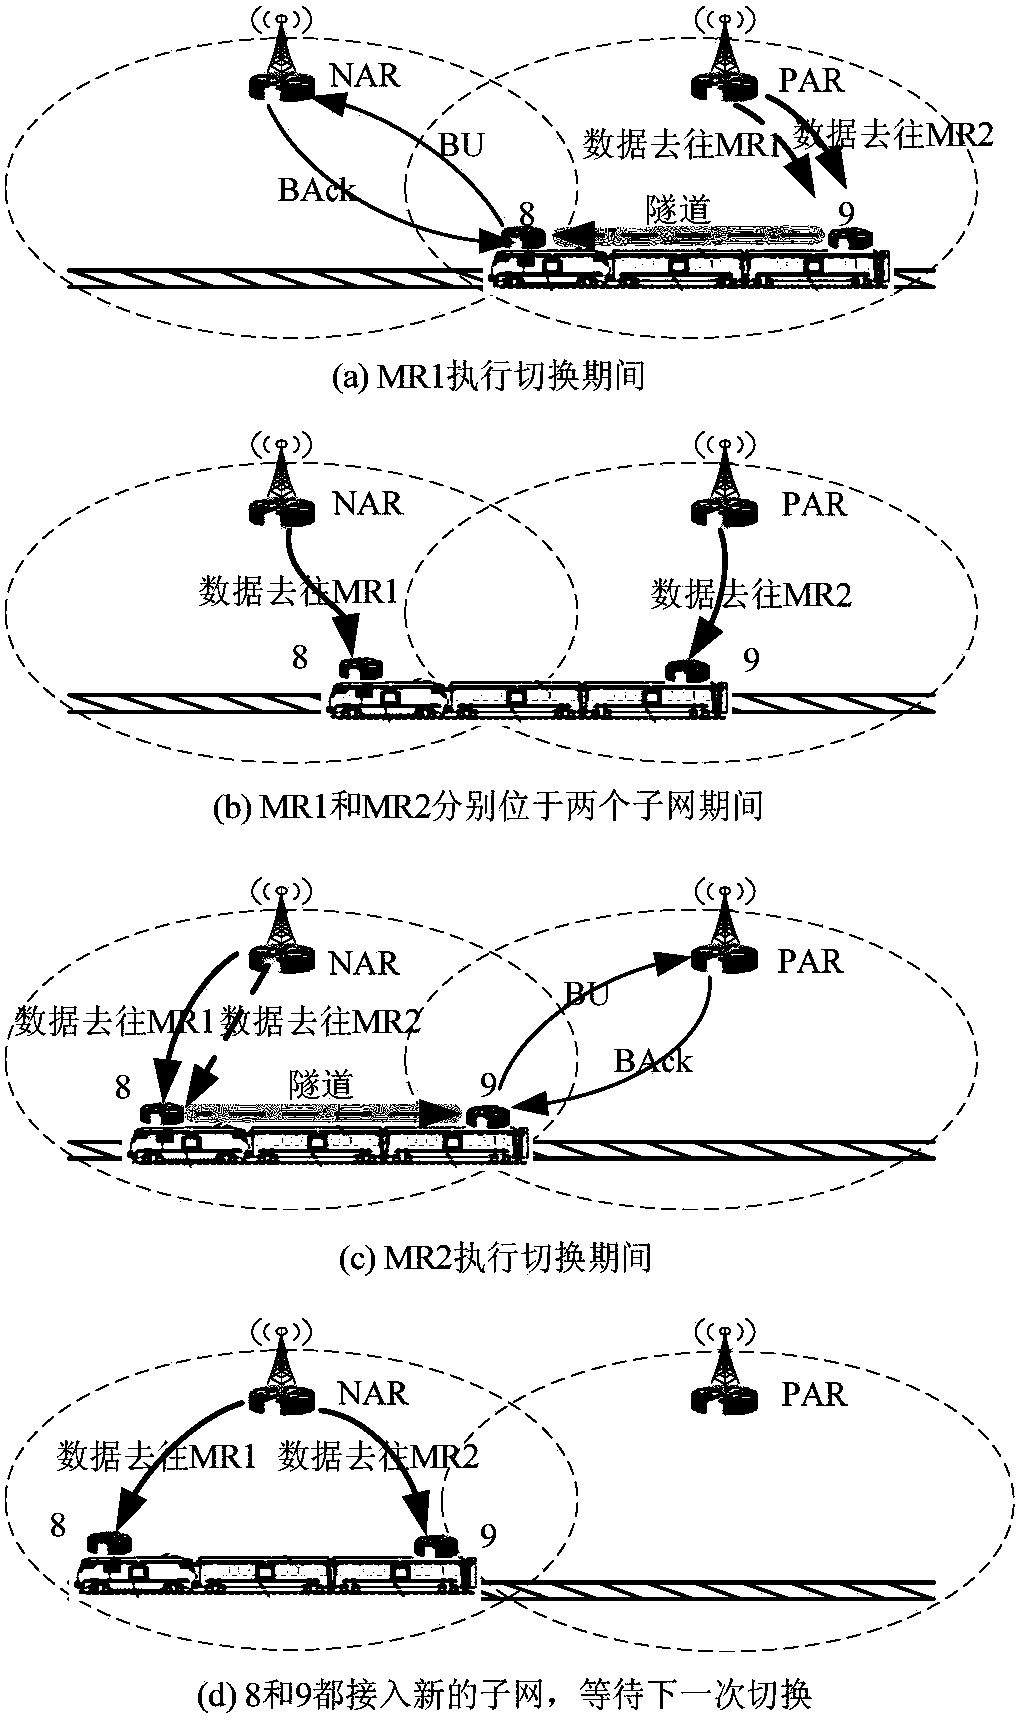 A method for implementing a broadband mobile intelligent communication network suitable for high-speed passenger dedicated lines